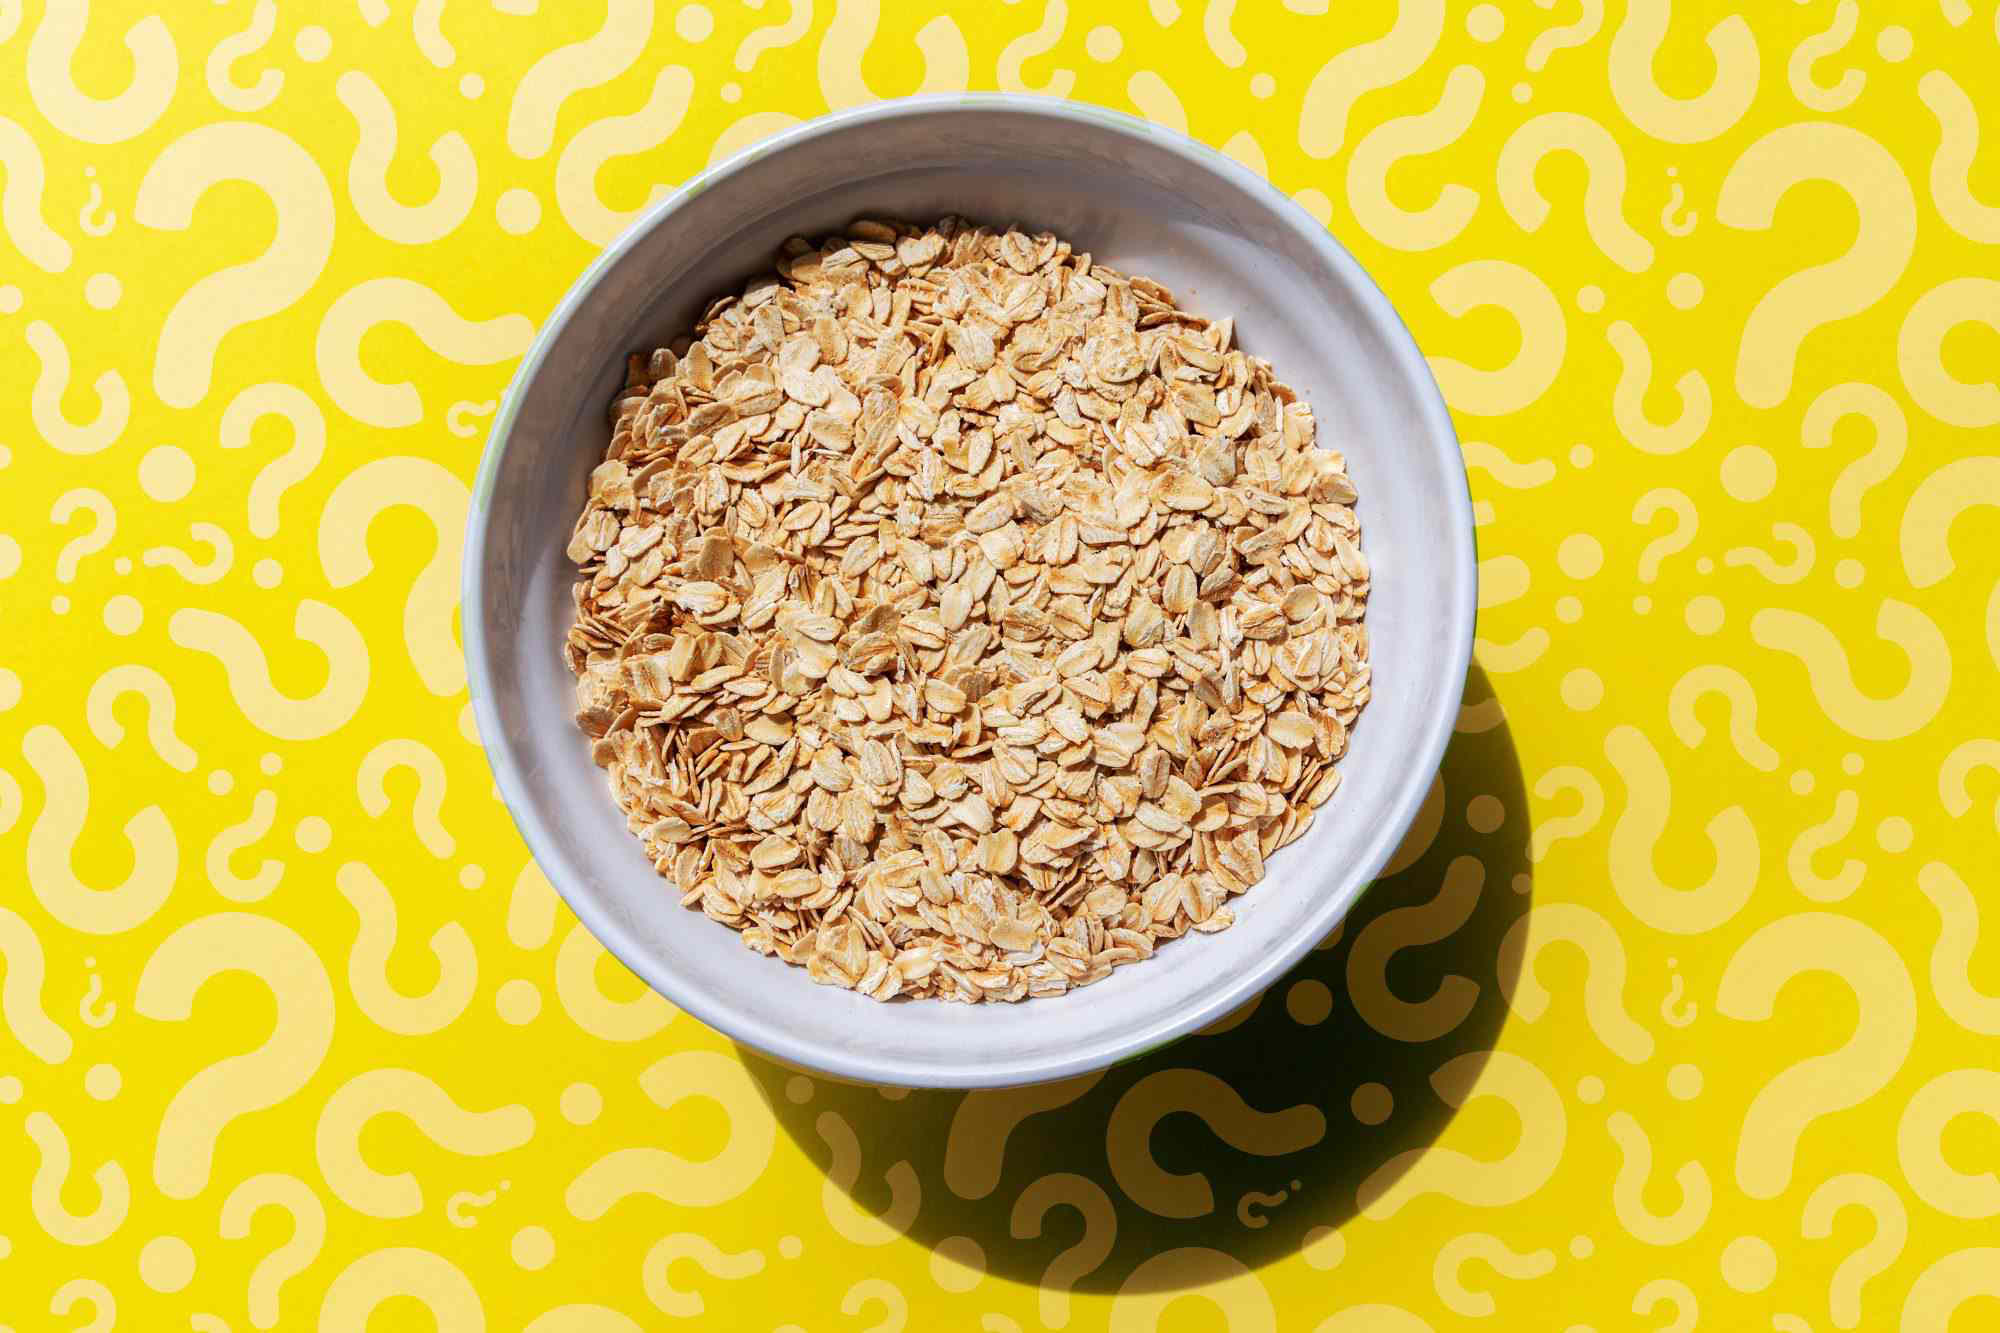 Does Oatmeal Cause or Relieve Constipation? Here's What a Dietitian Says